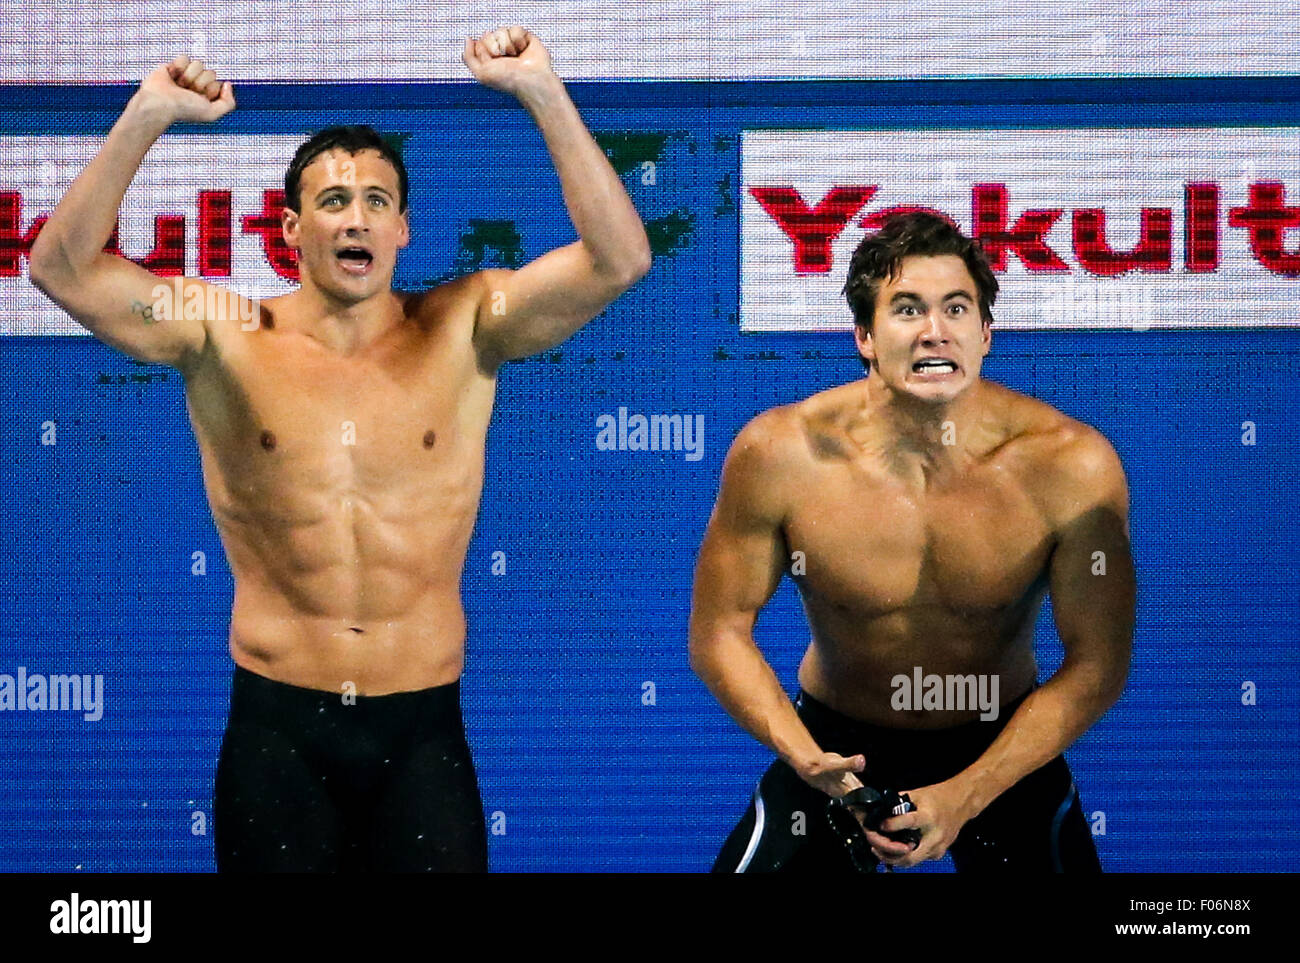 Kazan, Russia. 8th Aug, 2015. Ryan Lochte (L) and Nathan Adrian of the relay team of the United States react during the mixed 4x100m freestyle relay final at FINA World Championships in Kazan, Russia, Aug. 8, 2015. The United States claimed the title and broke the world record in a time of 3 minutes 23.05 seconds. © Zhang Fan/Xinhua/Alamy Live News Stock Photo